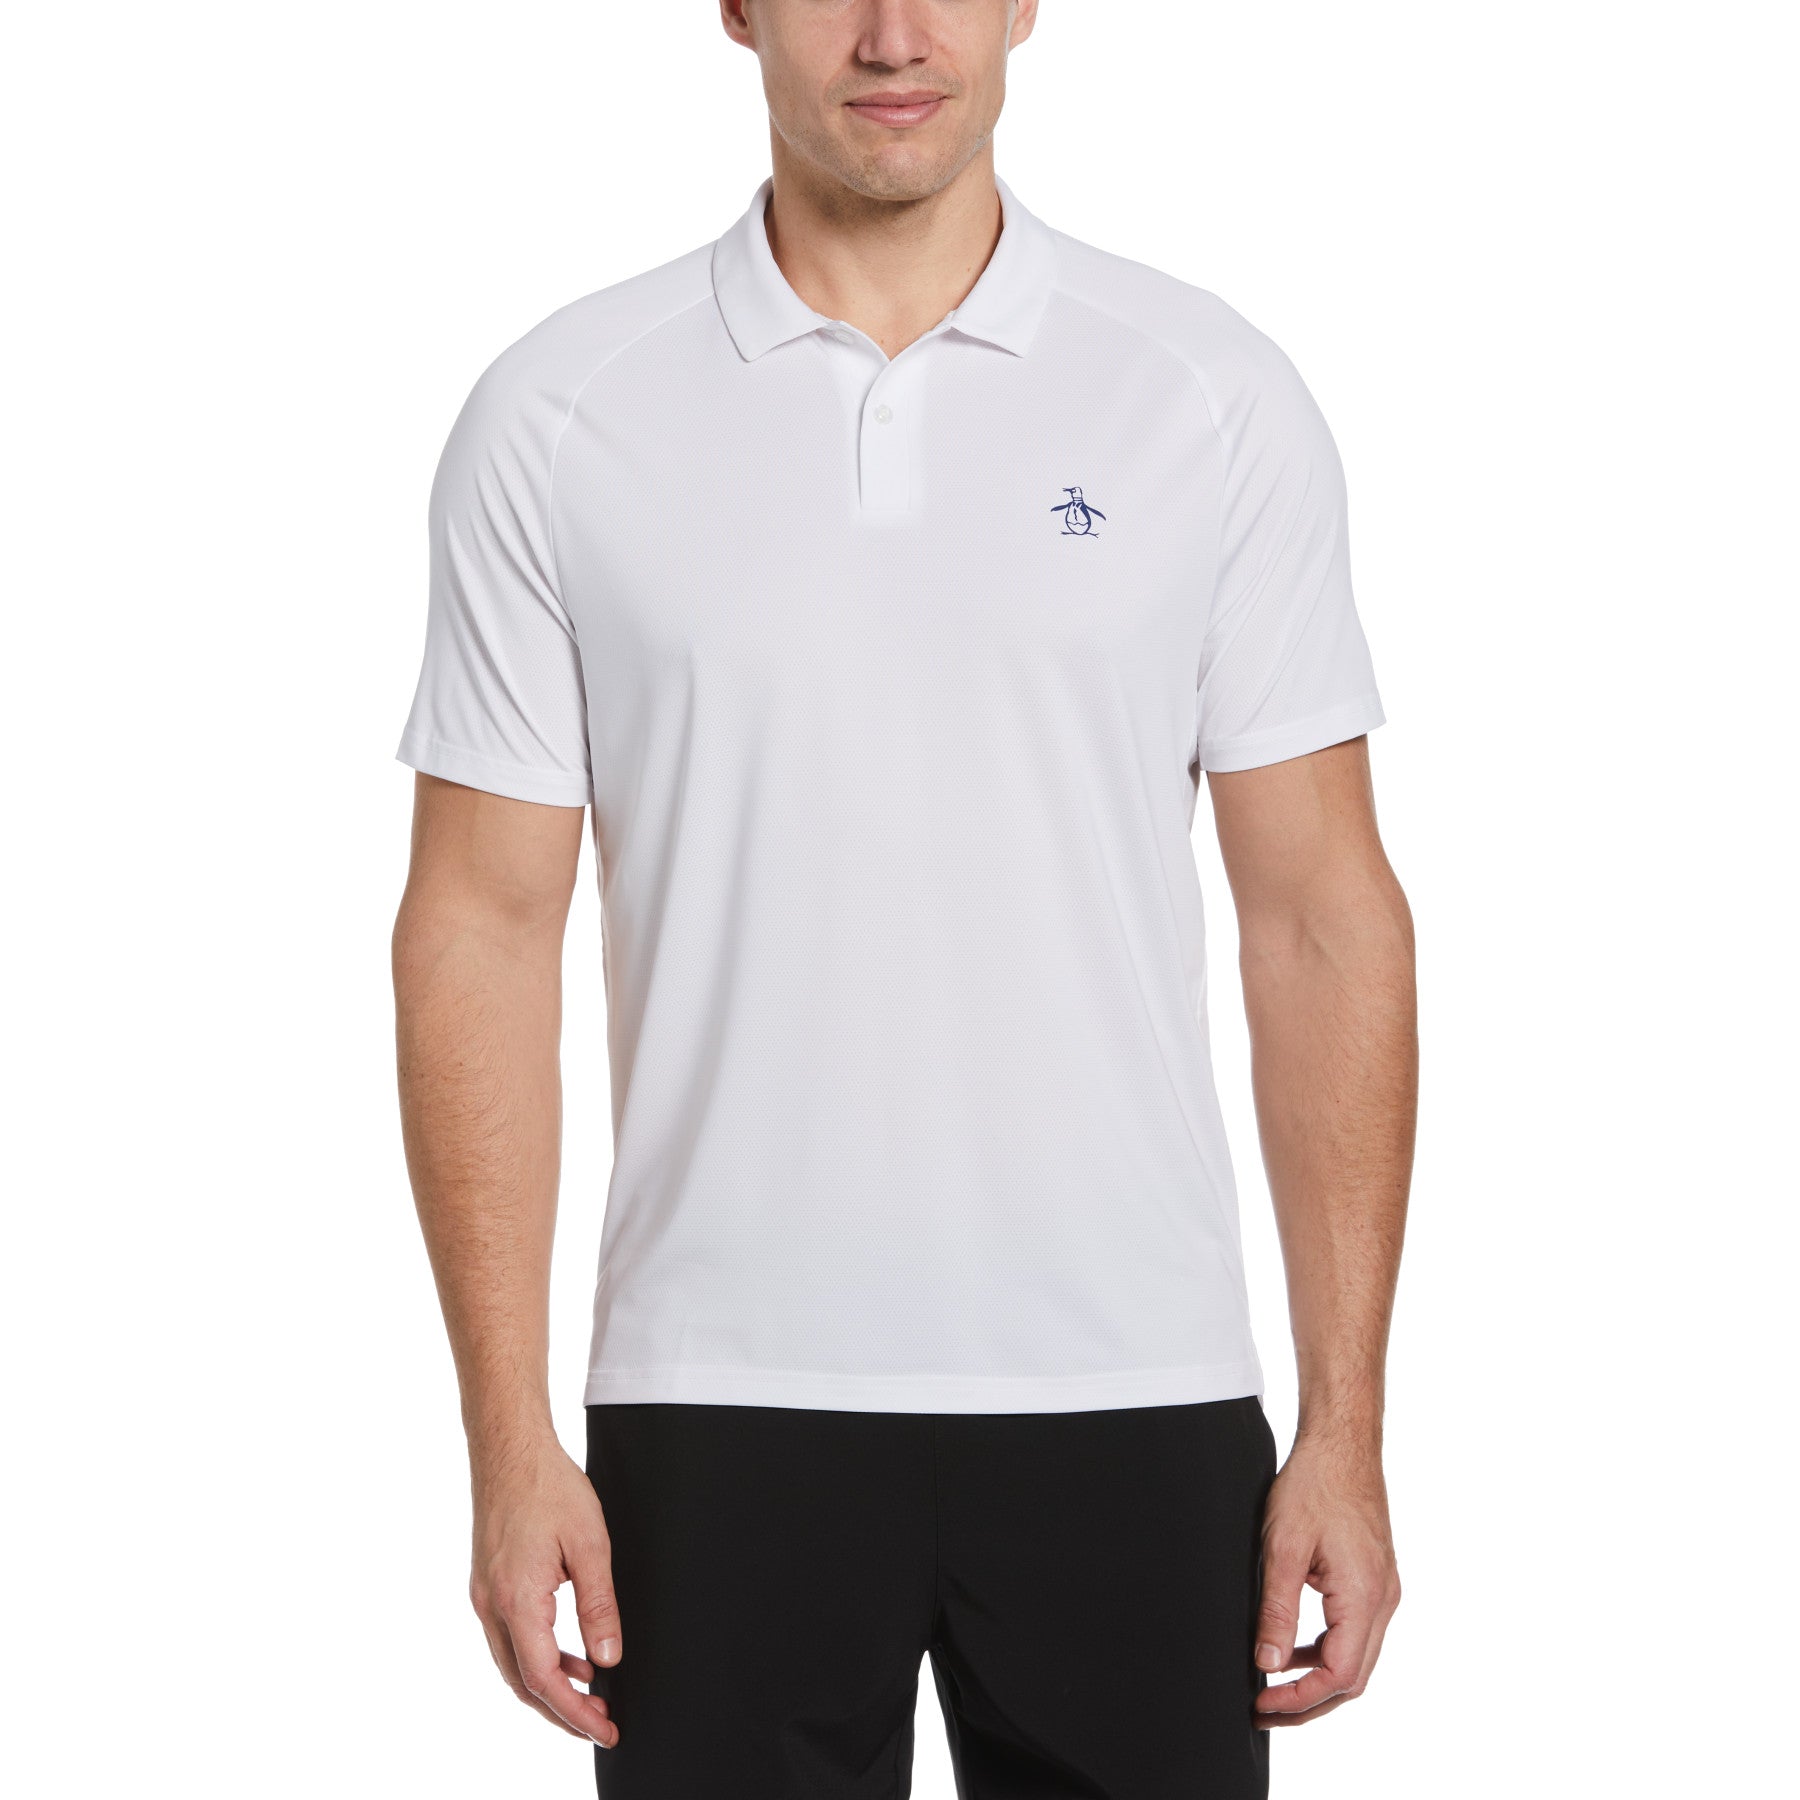 View Original Penguin Legacy Performance Tennis Polo Shirt In Bright White White Mens information